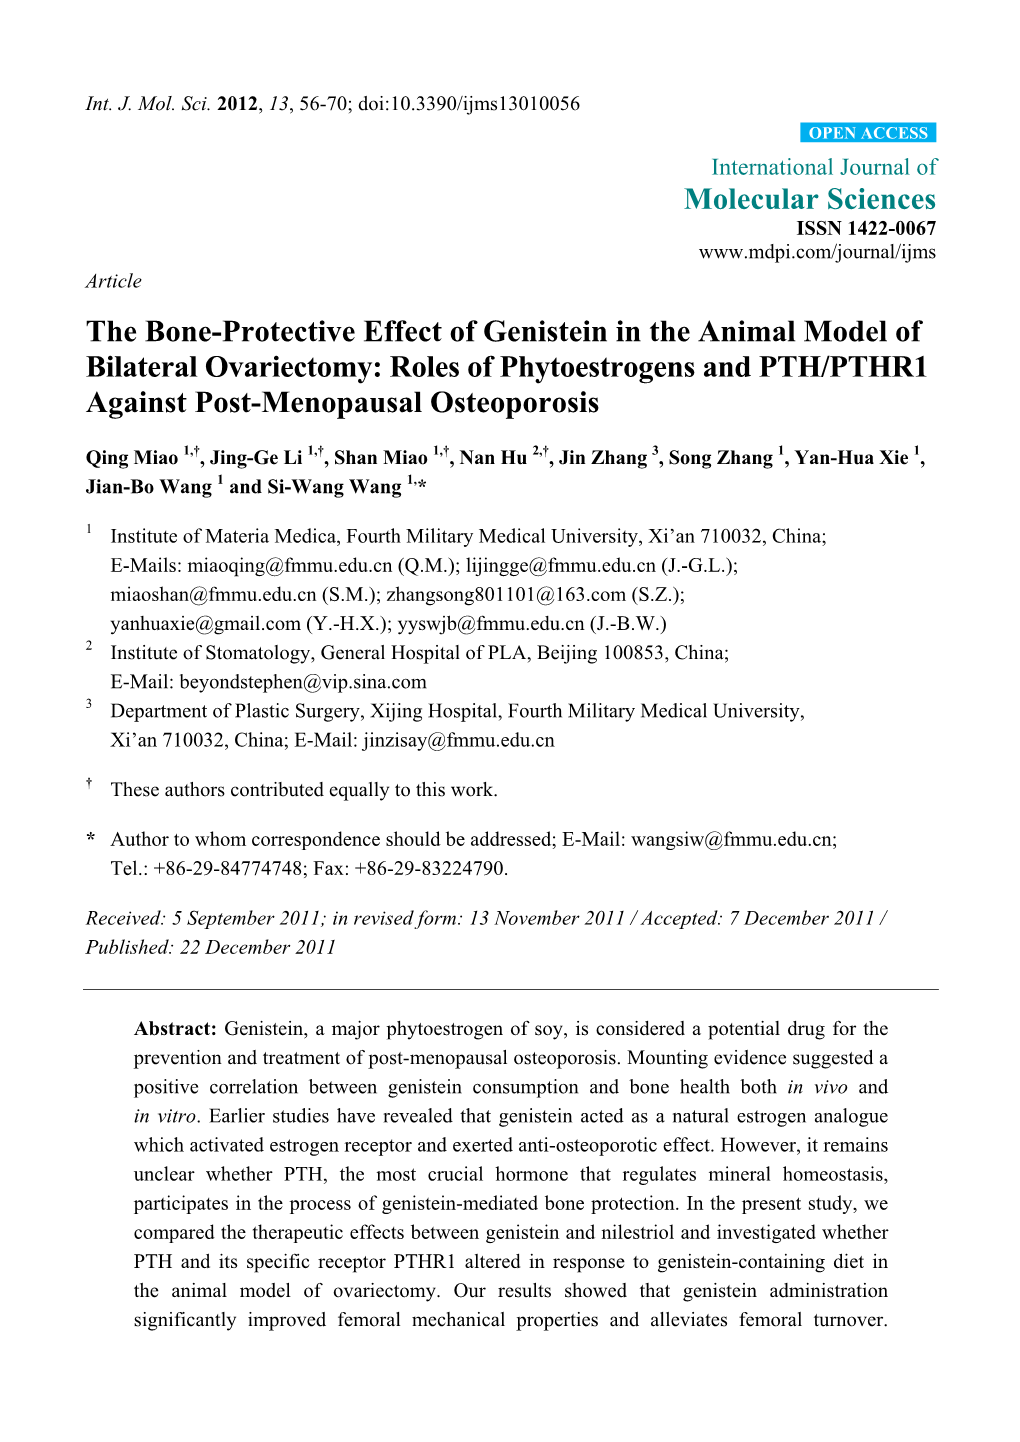 The Bone-Protective Effect of Genistein in the Animal Model of Bilateral Ovariectomy: Roles of Phytoestrogens and PTH/PTHR1 Against Post-Menopausal Osteoporosis